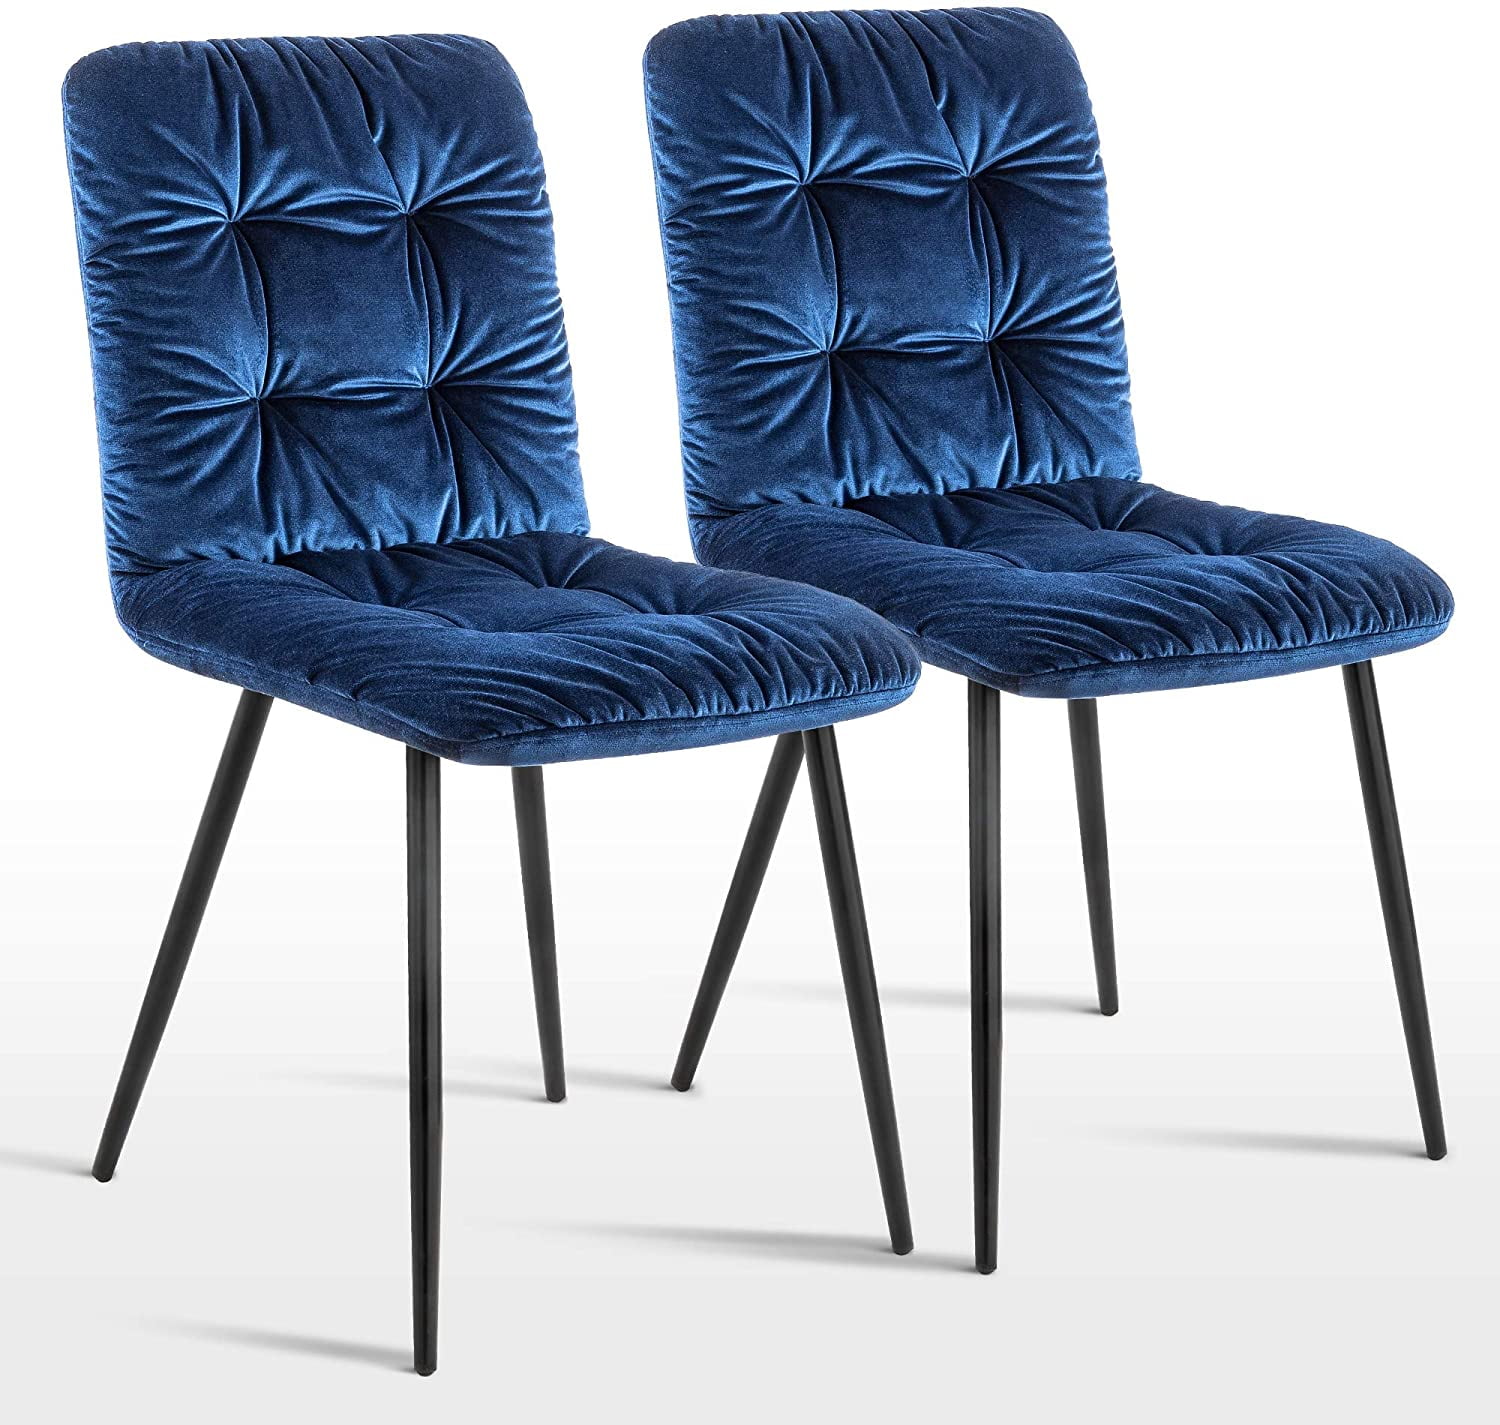 Ivinta Mid-Century Sapphire Dining Chairs Set of 2 Velvet Accent Chair Tufting Side Living Room Chairs Armless Makeup for Living Room Dining Room Kitchen … - Walmart.com